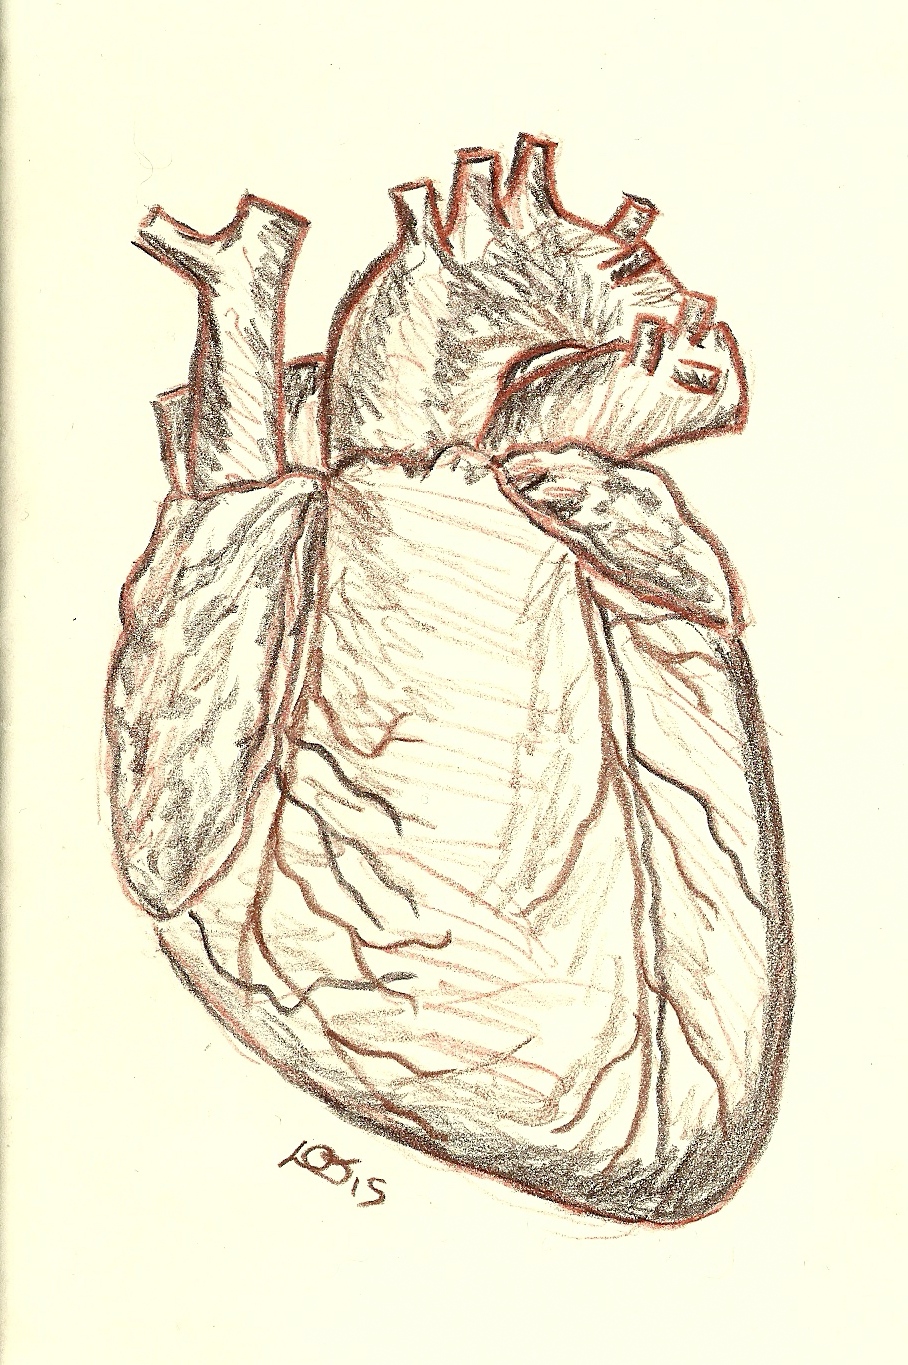 Shrubbery...: Heart in Derwent drawing pencils